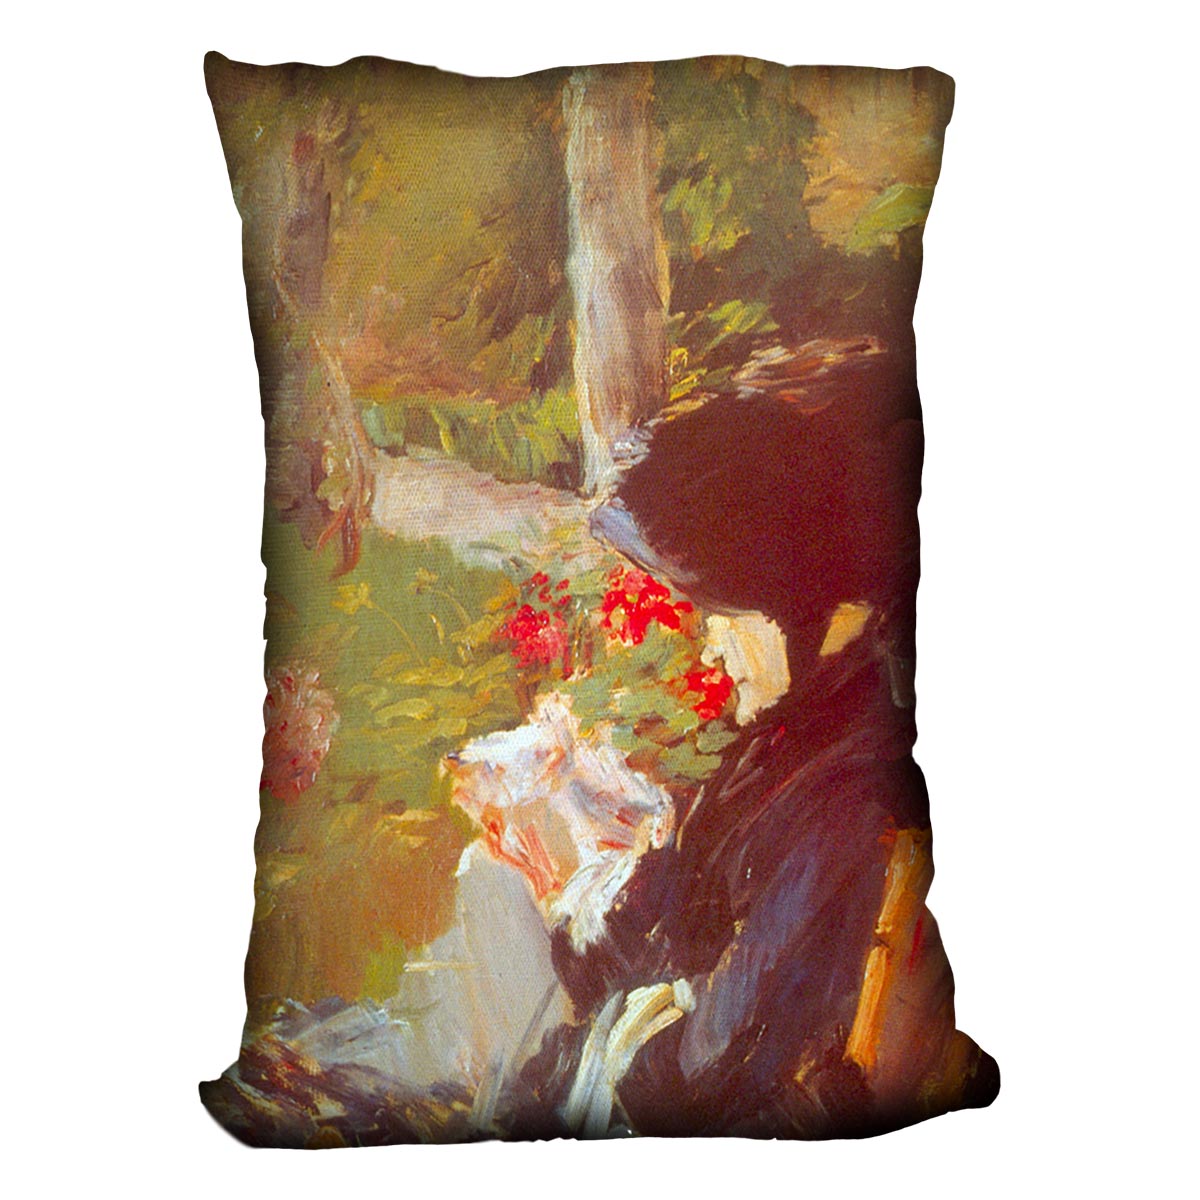 Manets Mother by Manet Cushion